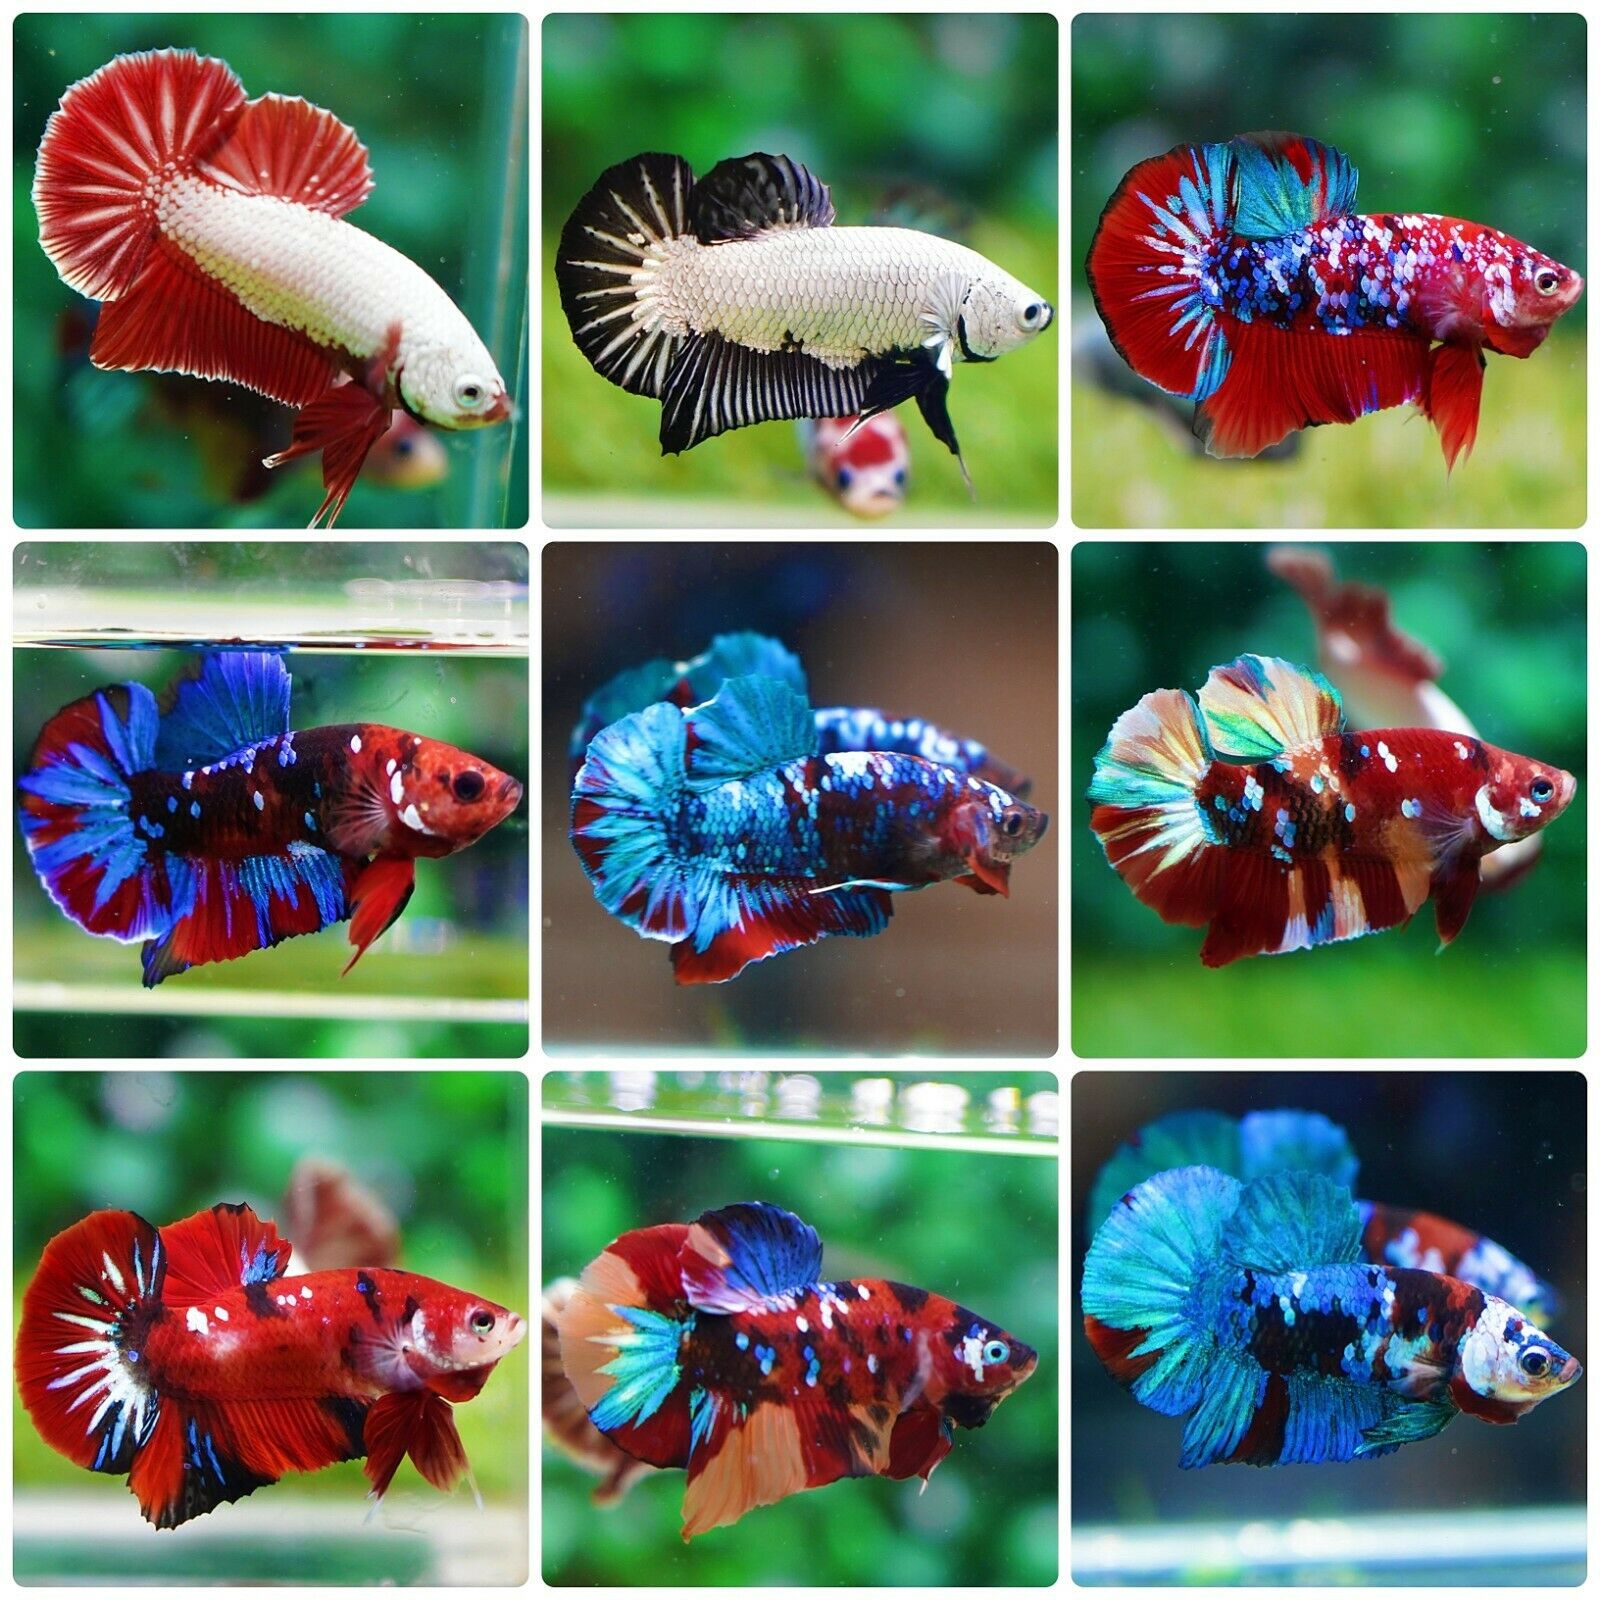 Live Betta Fish High Quality Halfmoon Plakat - Wholesale Price For Limit Time